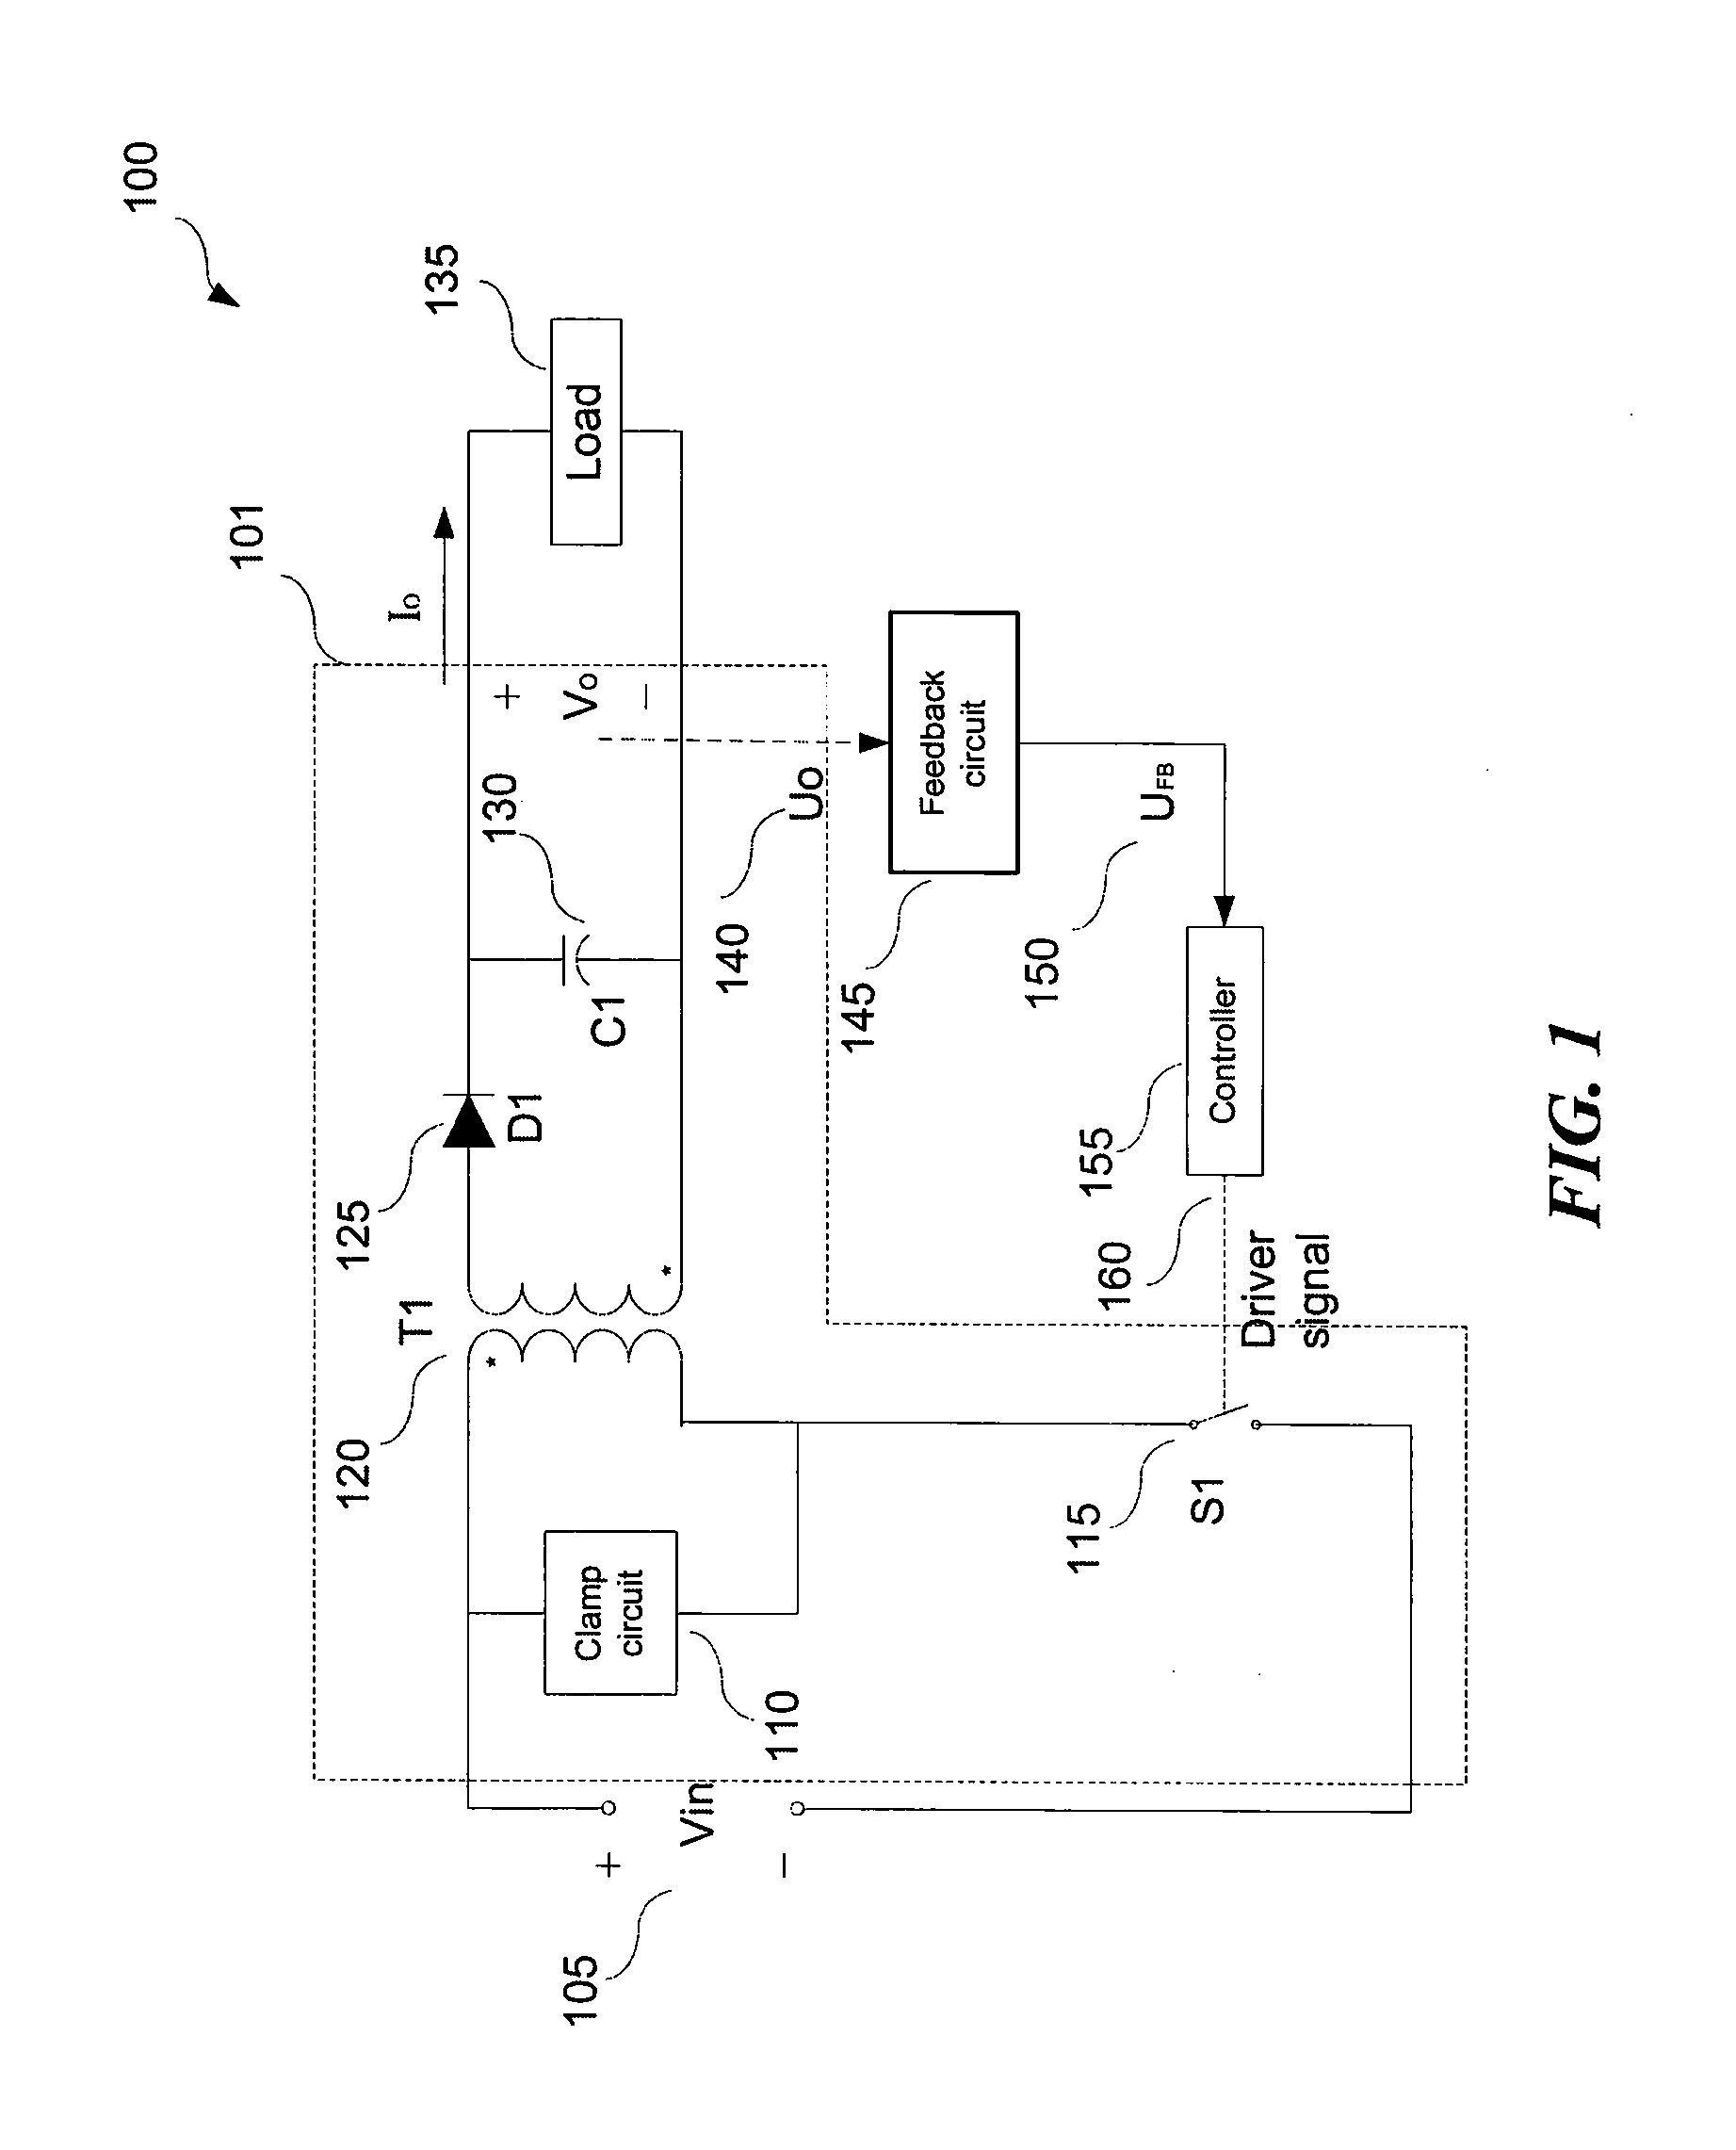 Power systems for driving light emitting diodes and associated methods of control